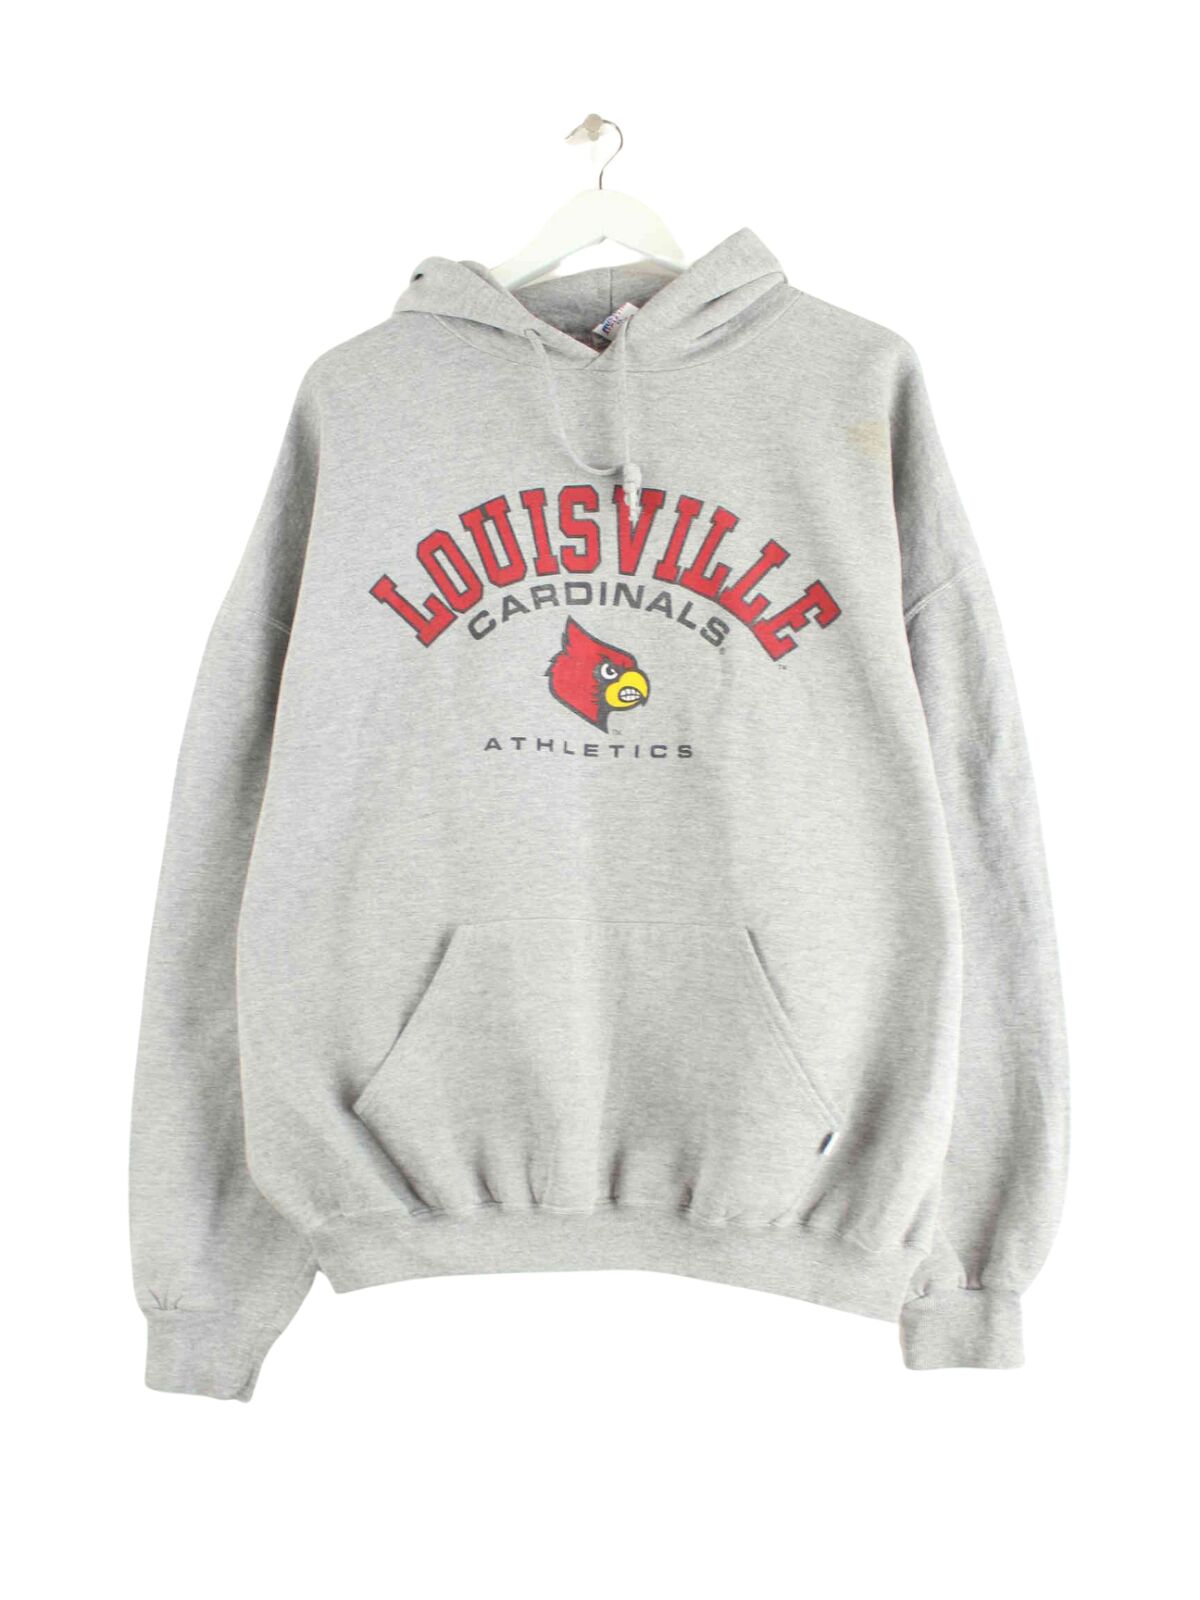 Russell Athletic 00s Louisville Cadinals Print Heavy Hoodie Grau XL (front image)